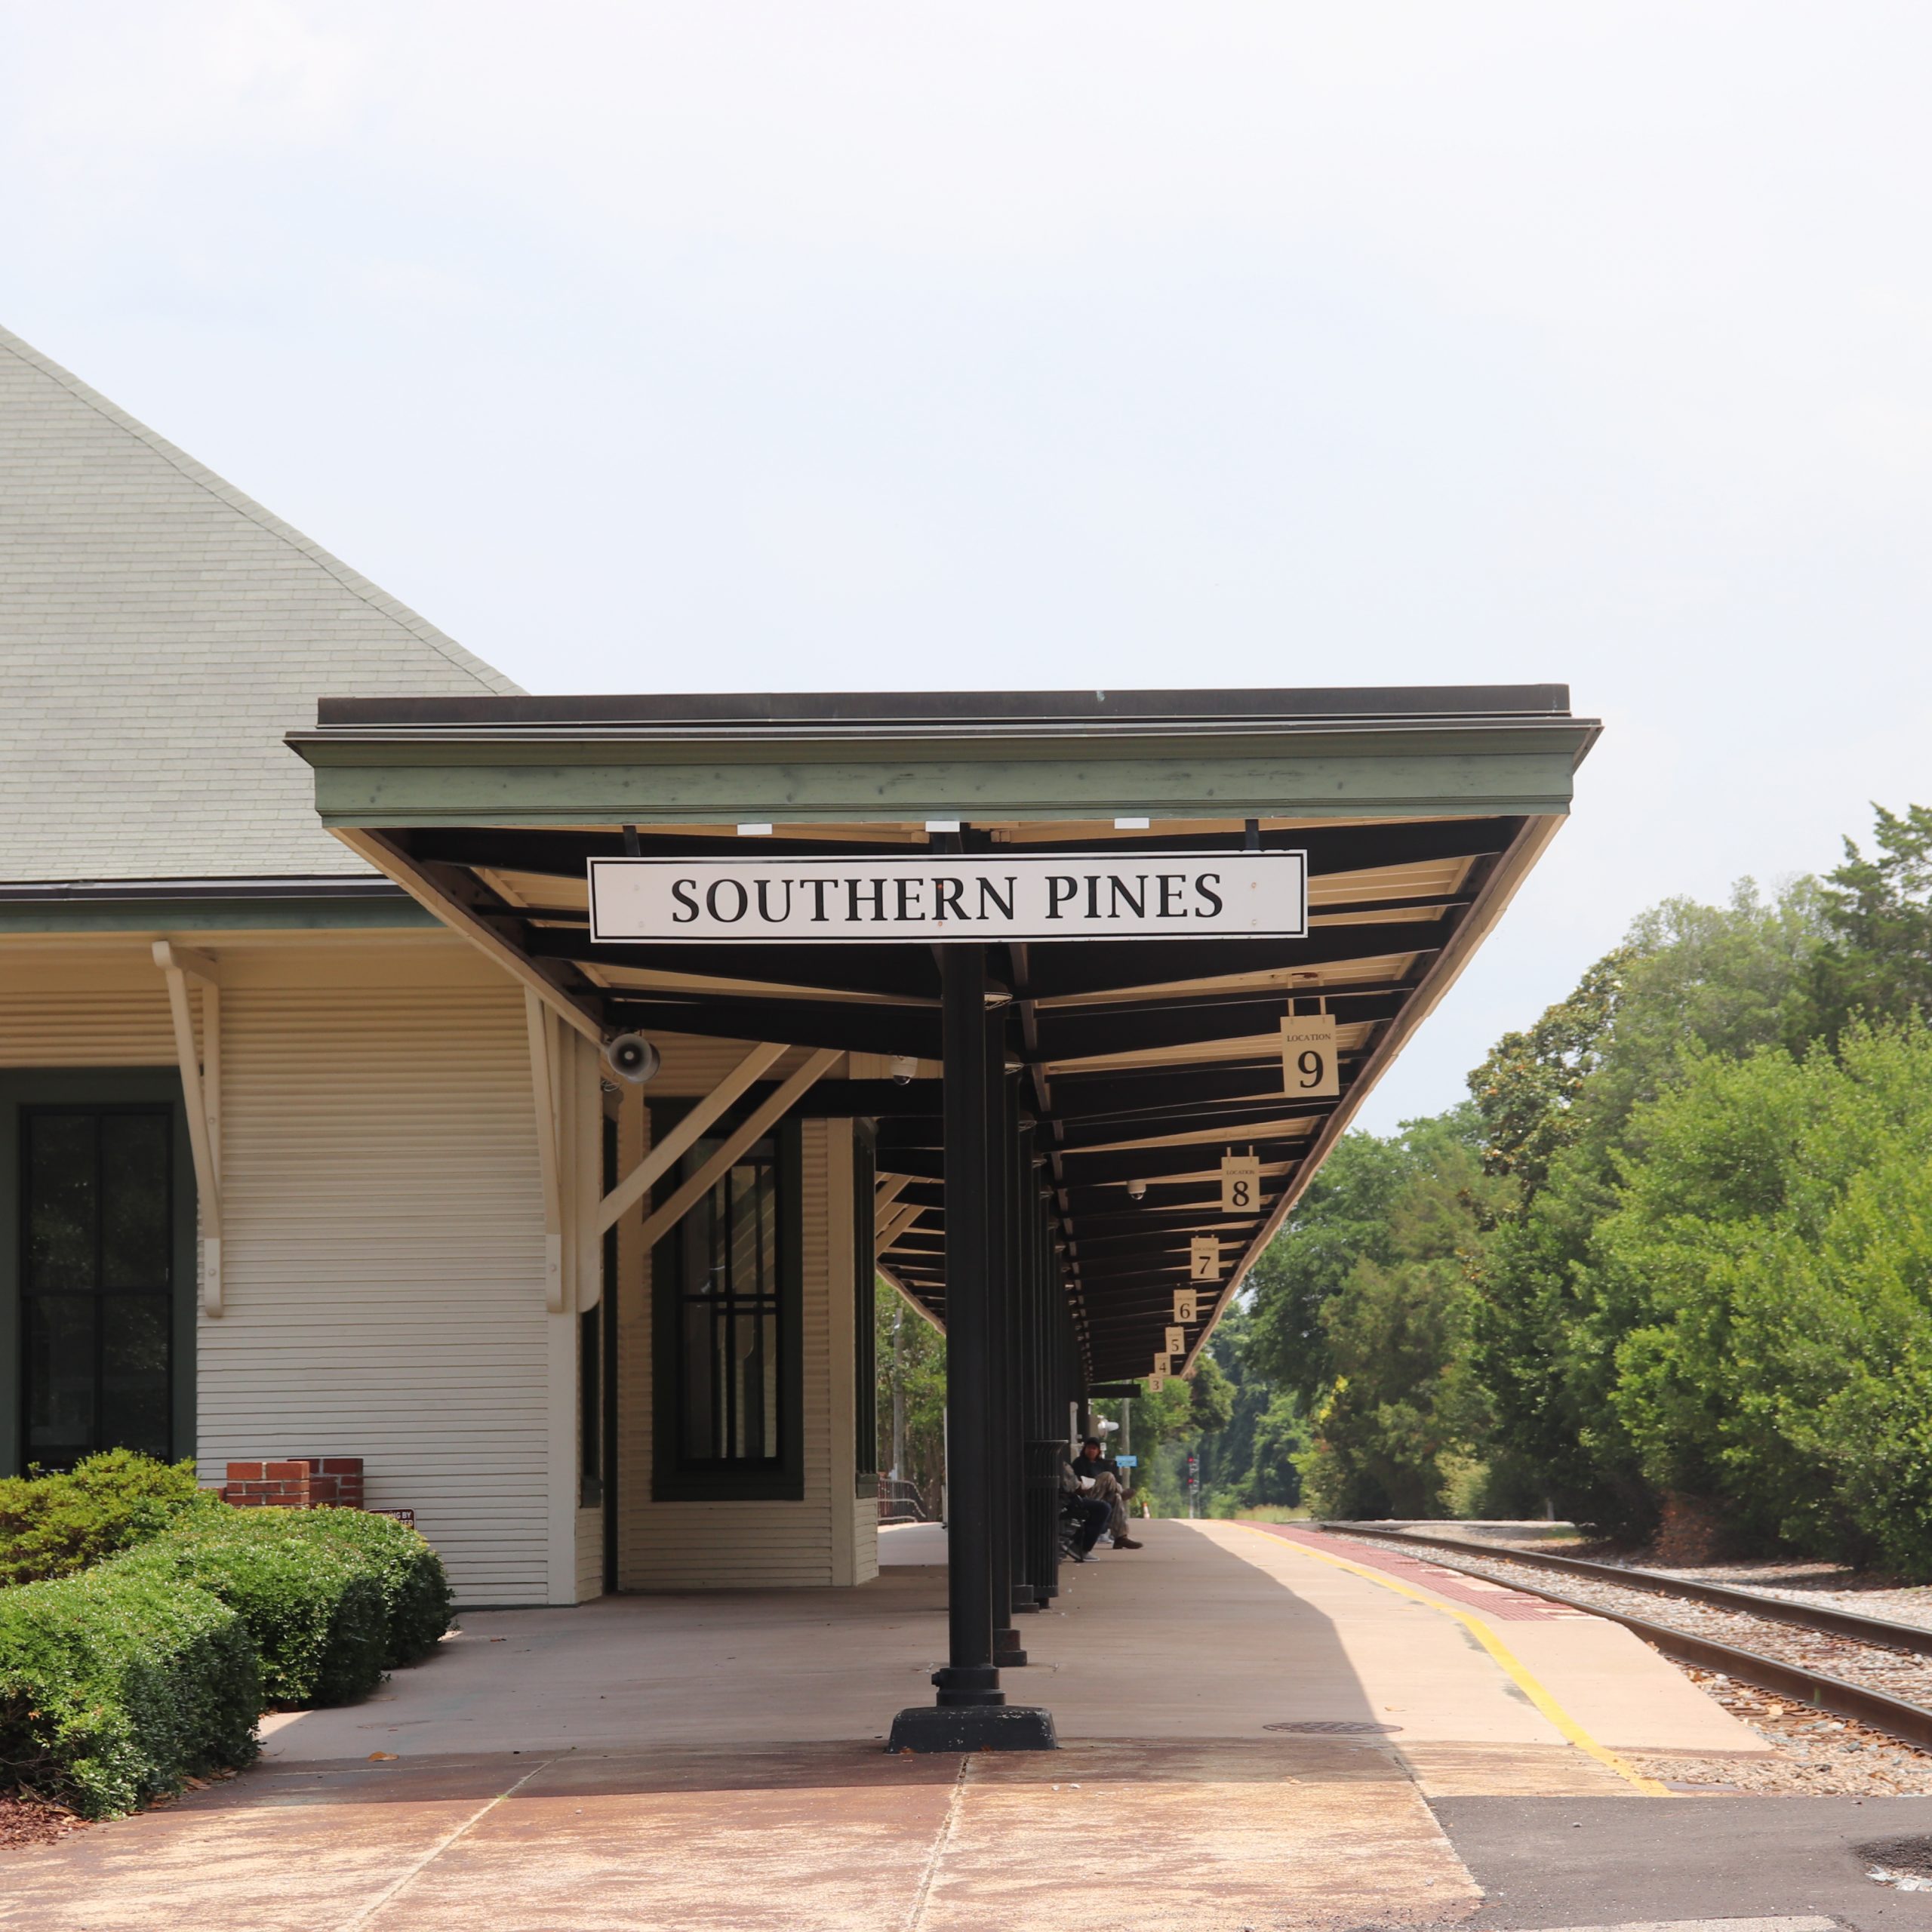 Southern Pines Train Station
